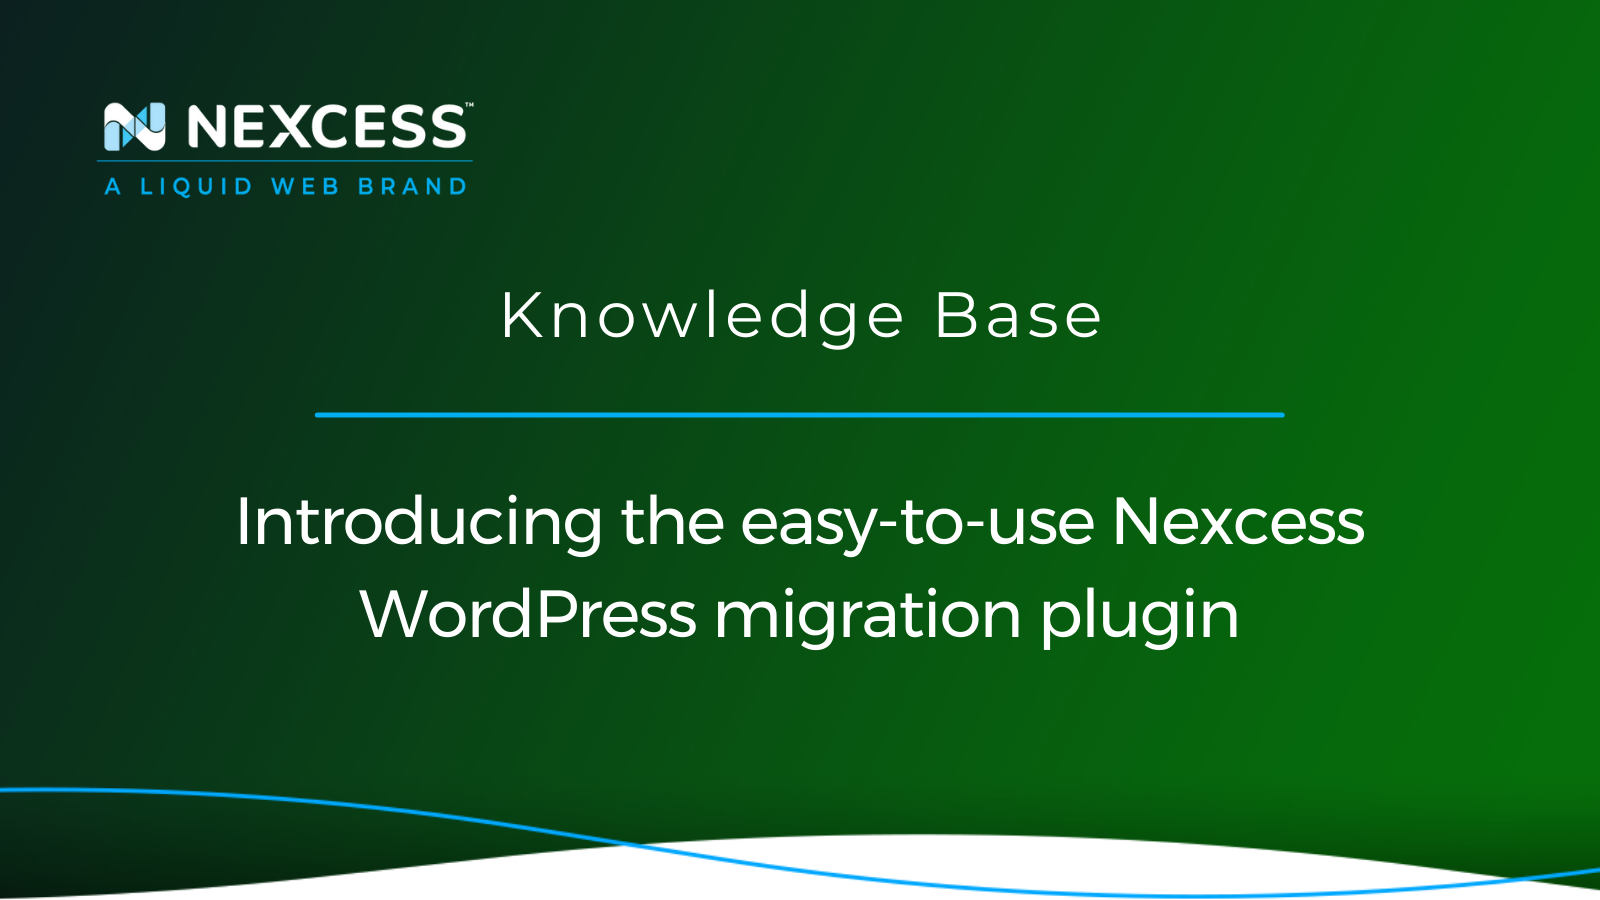 Introducing the easy-to-use Nexcess WordPress migration plugin